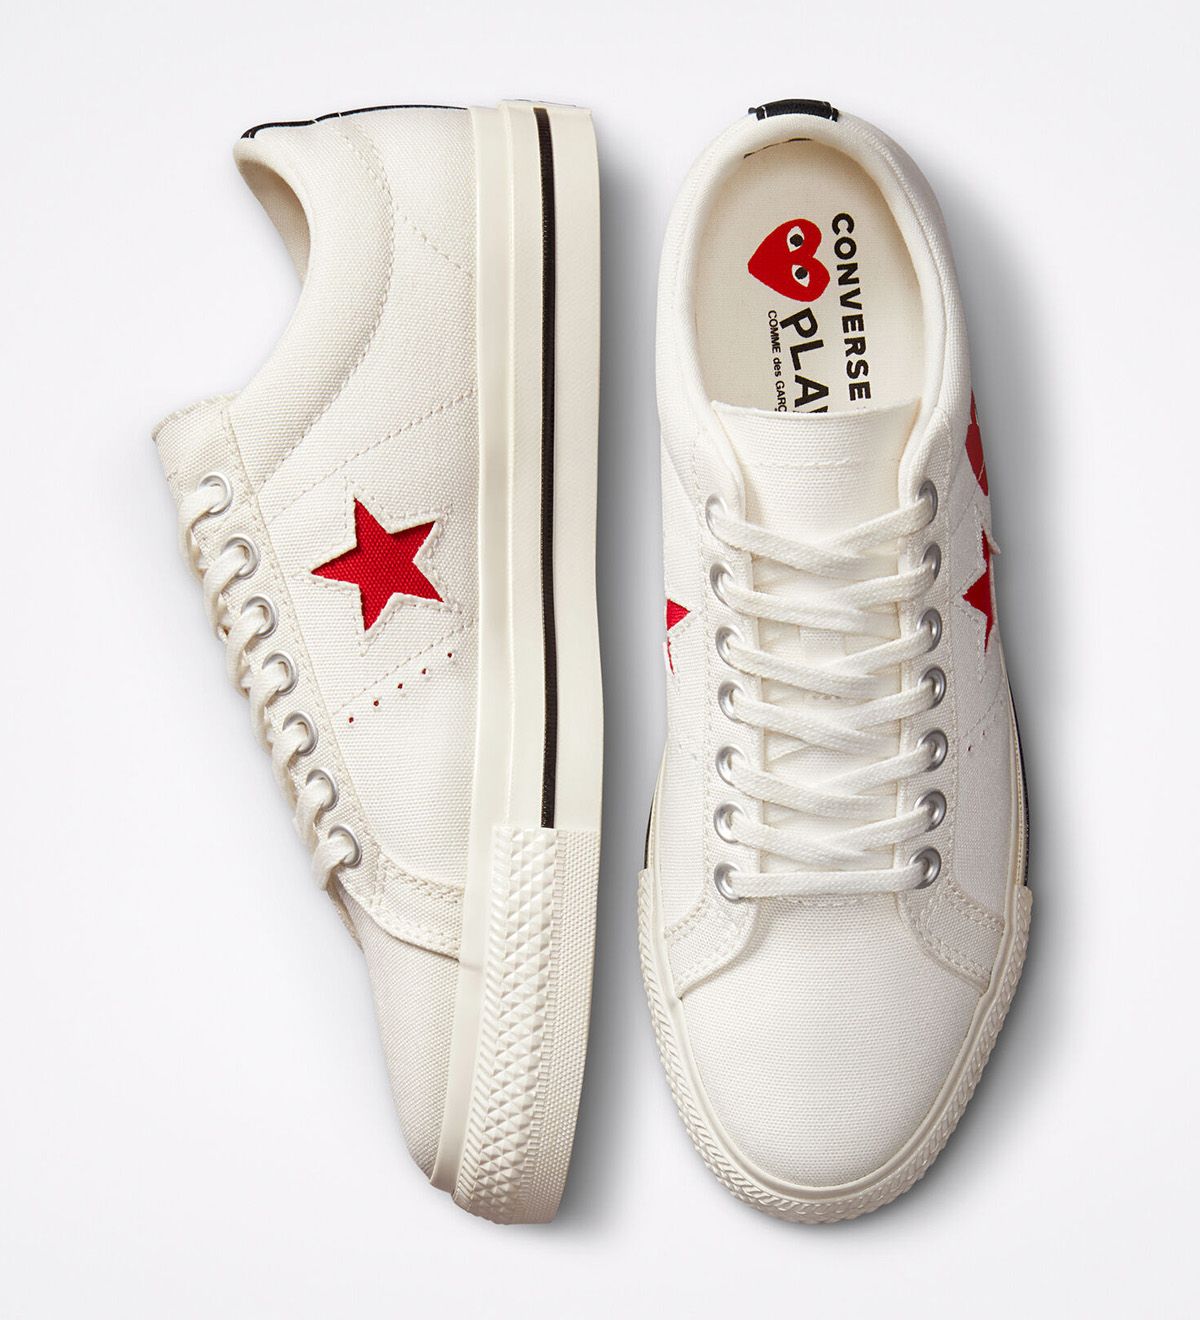 Comme des Garçons PLAY x Converse One Star Releases July 28